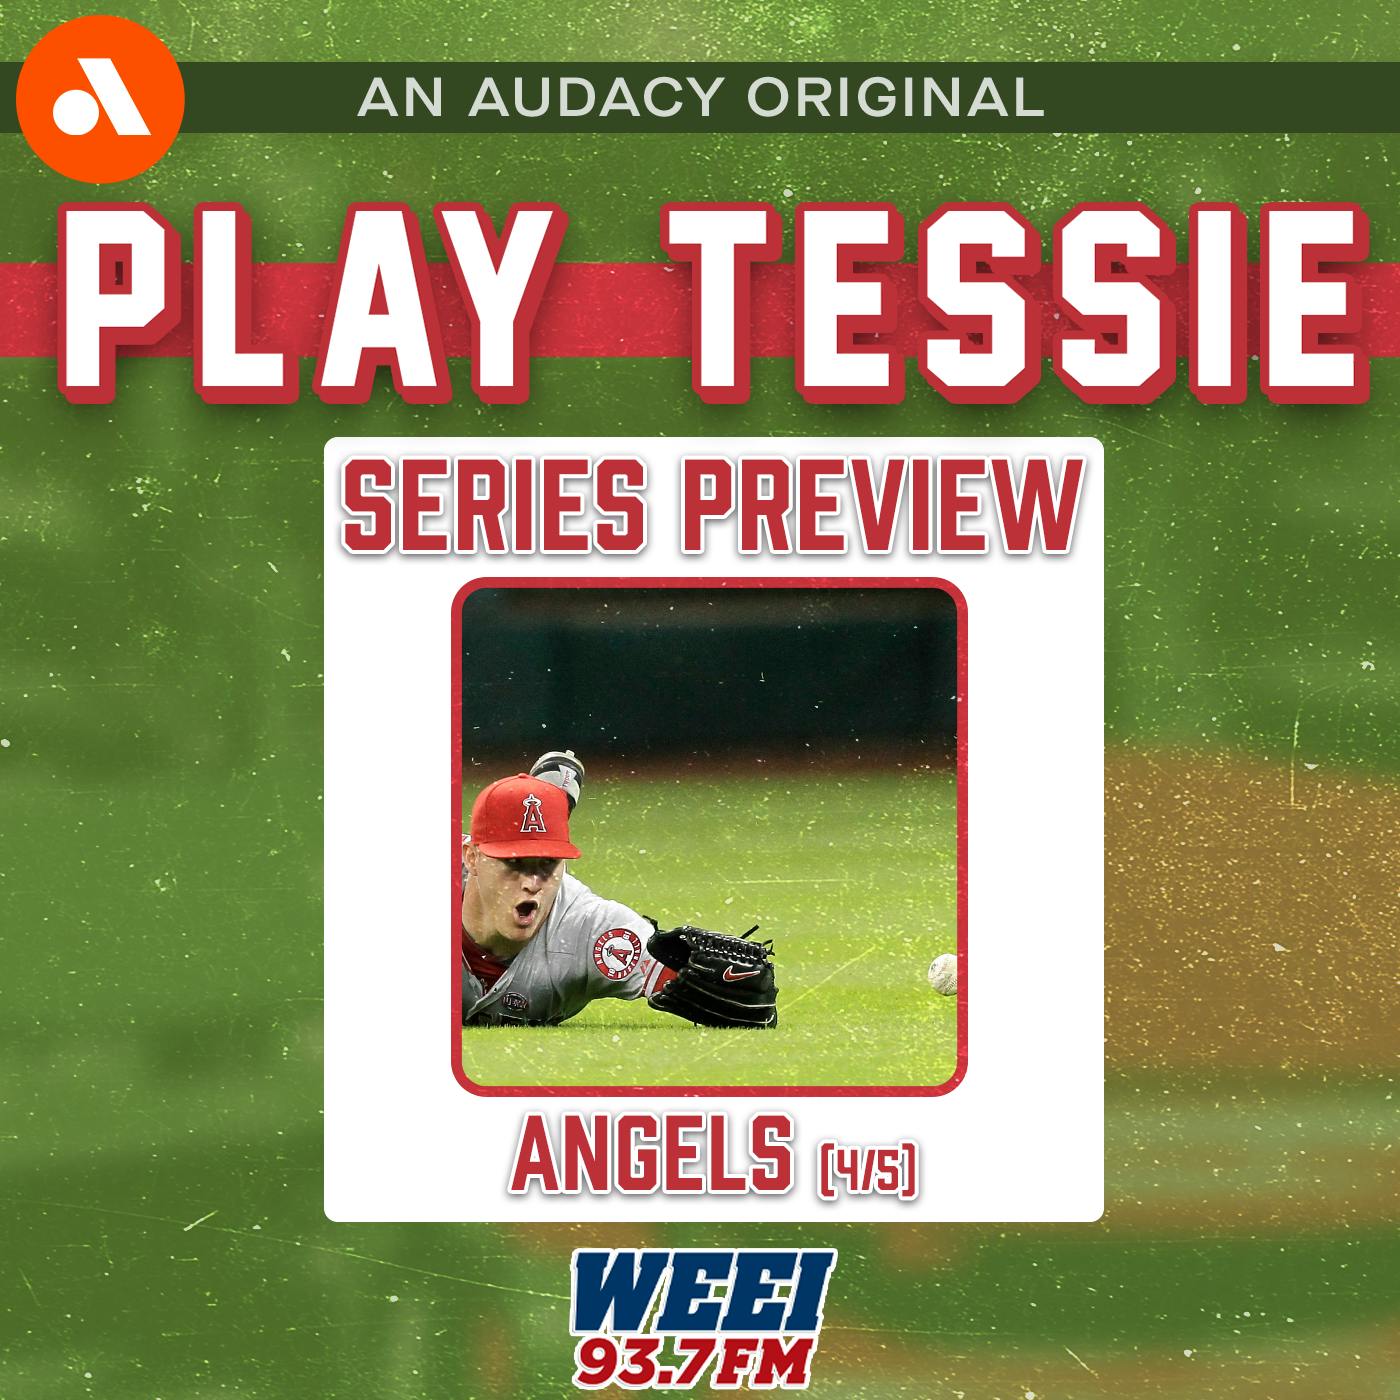 Series Preview: Angels (4/5)